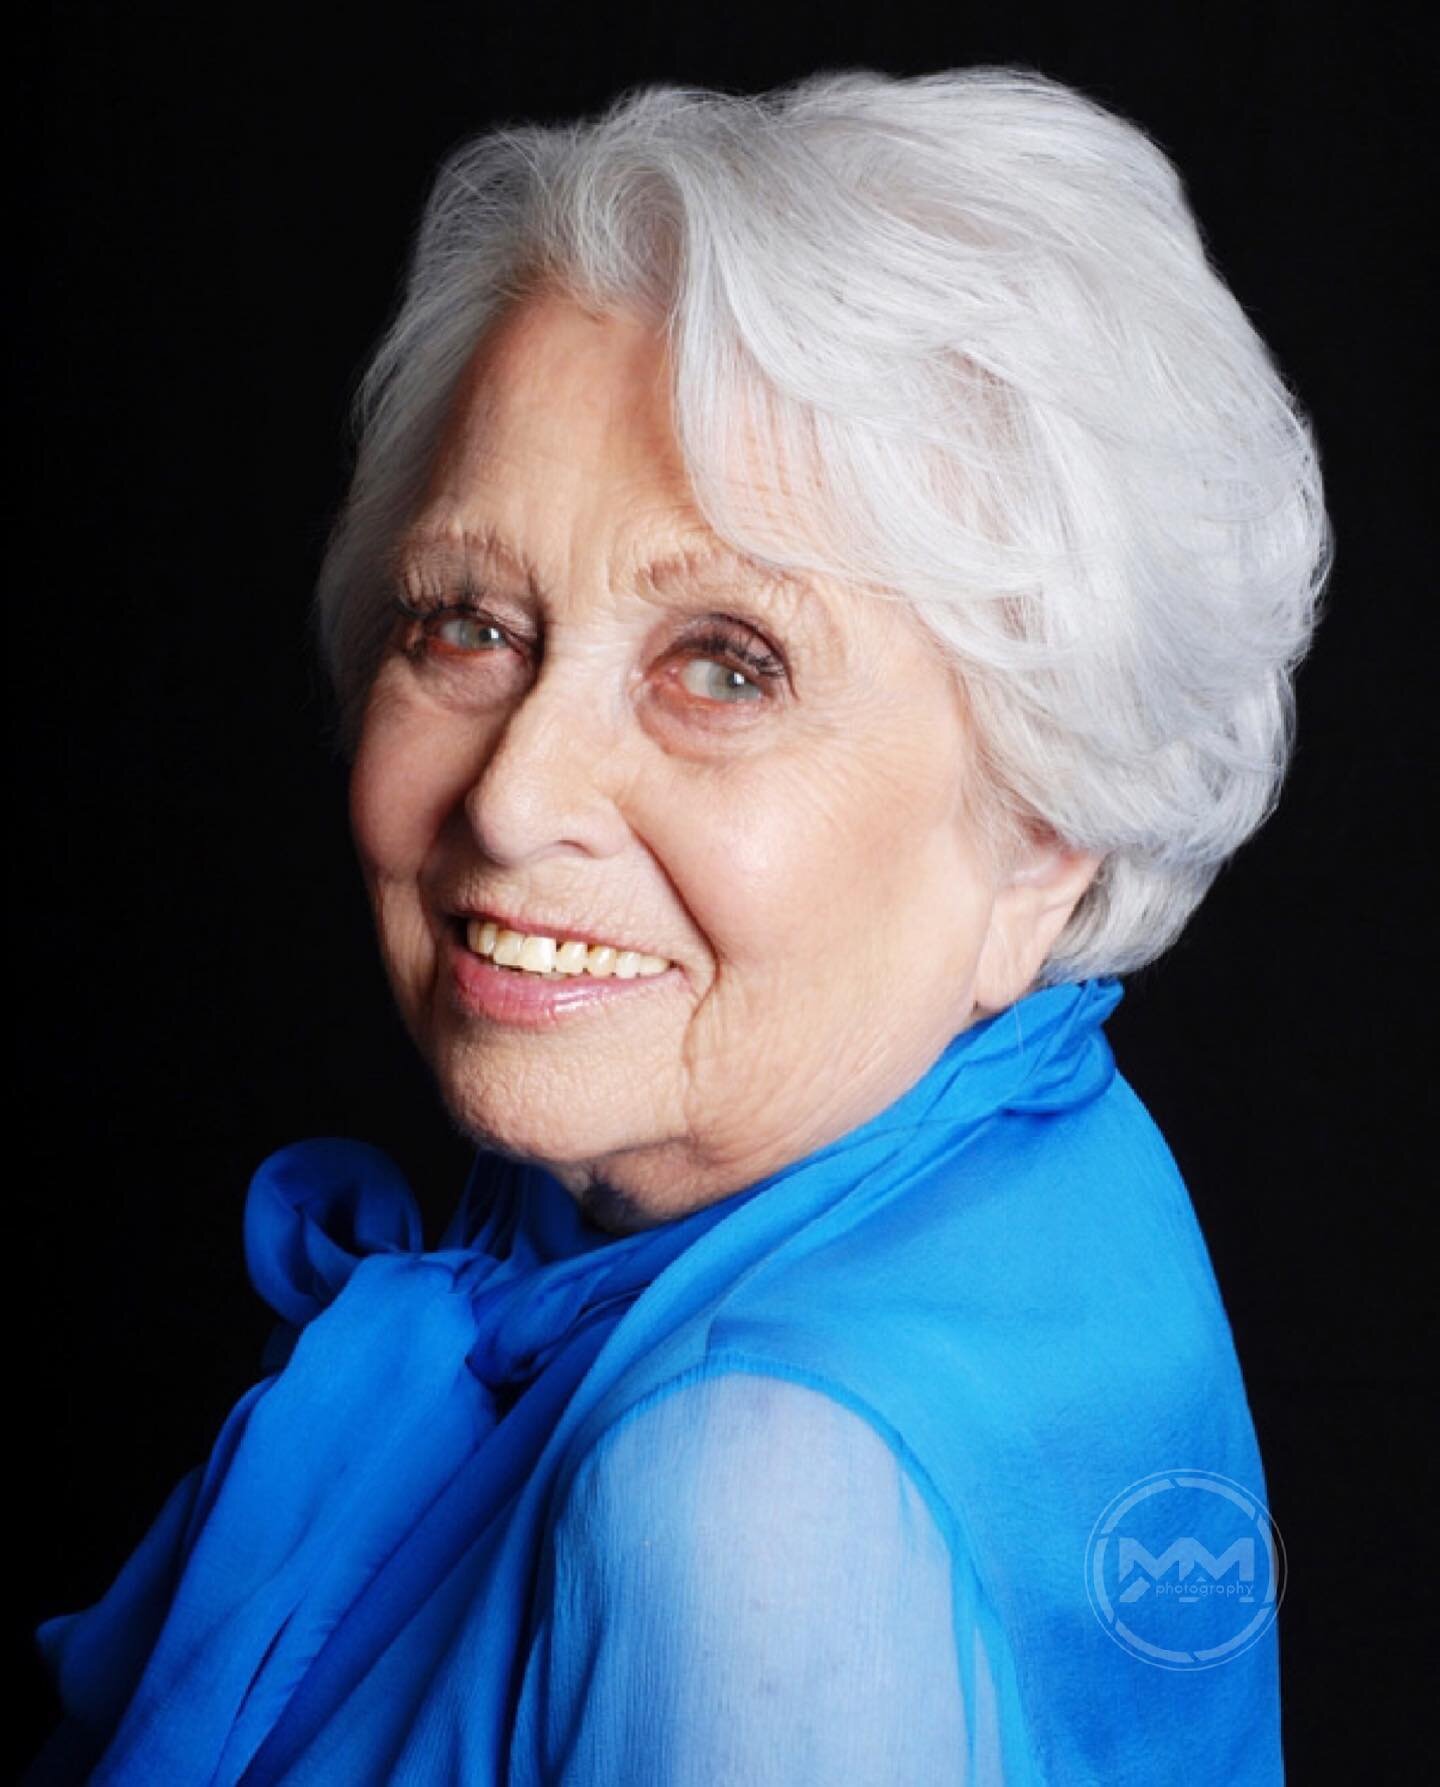 I truly admire artist Judith Pestronk, I did her portraits in 2010 in New York City at her apartment. Can you believe she was posing like a star at 89 years old!
A sculpturist, a jewelry designer and a professor of art at Nassau Community College, Ju